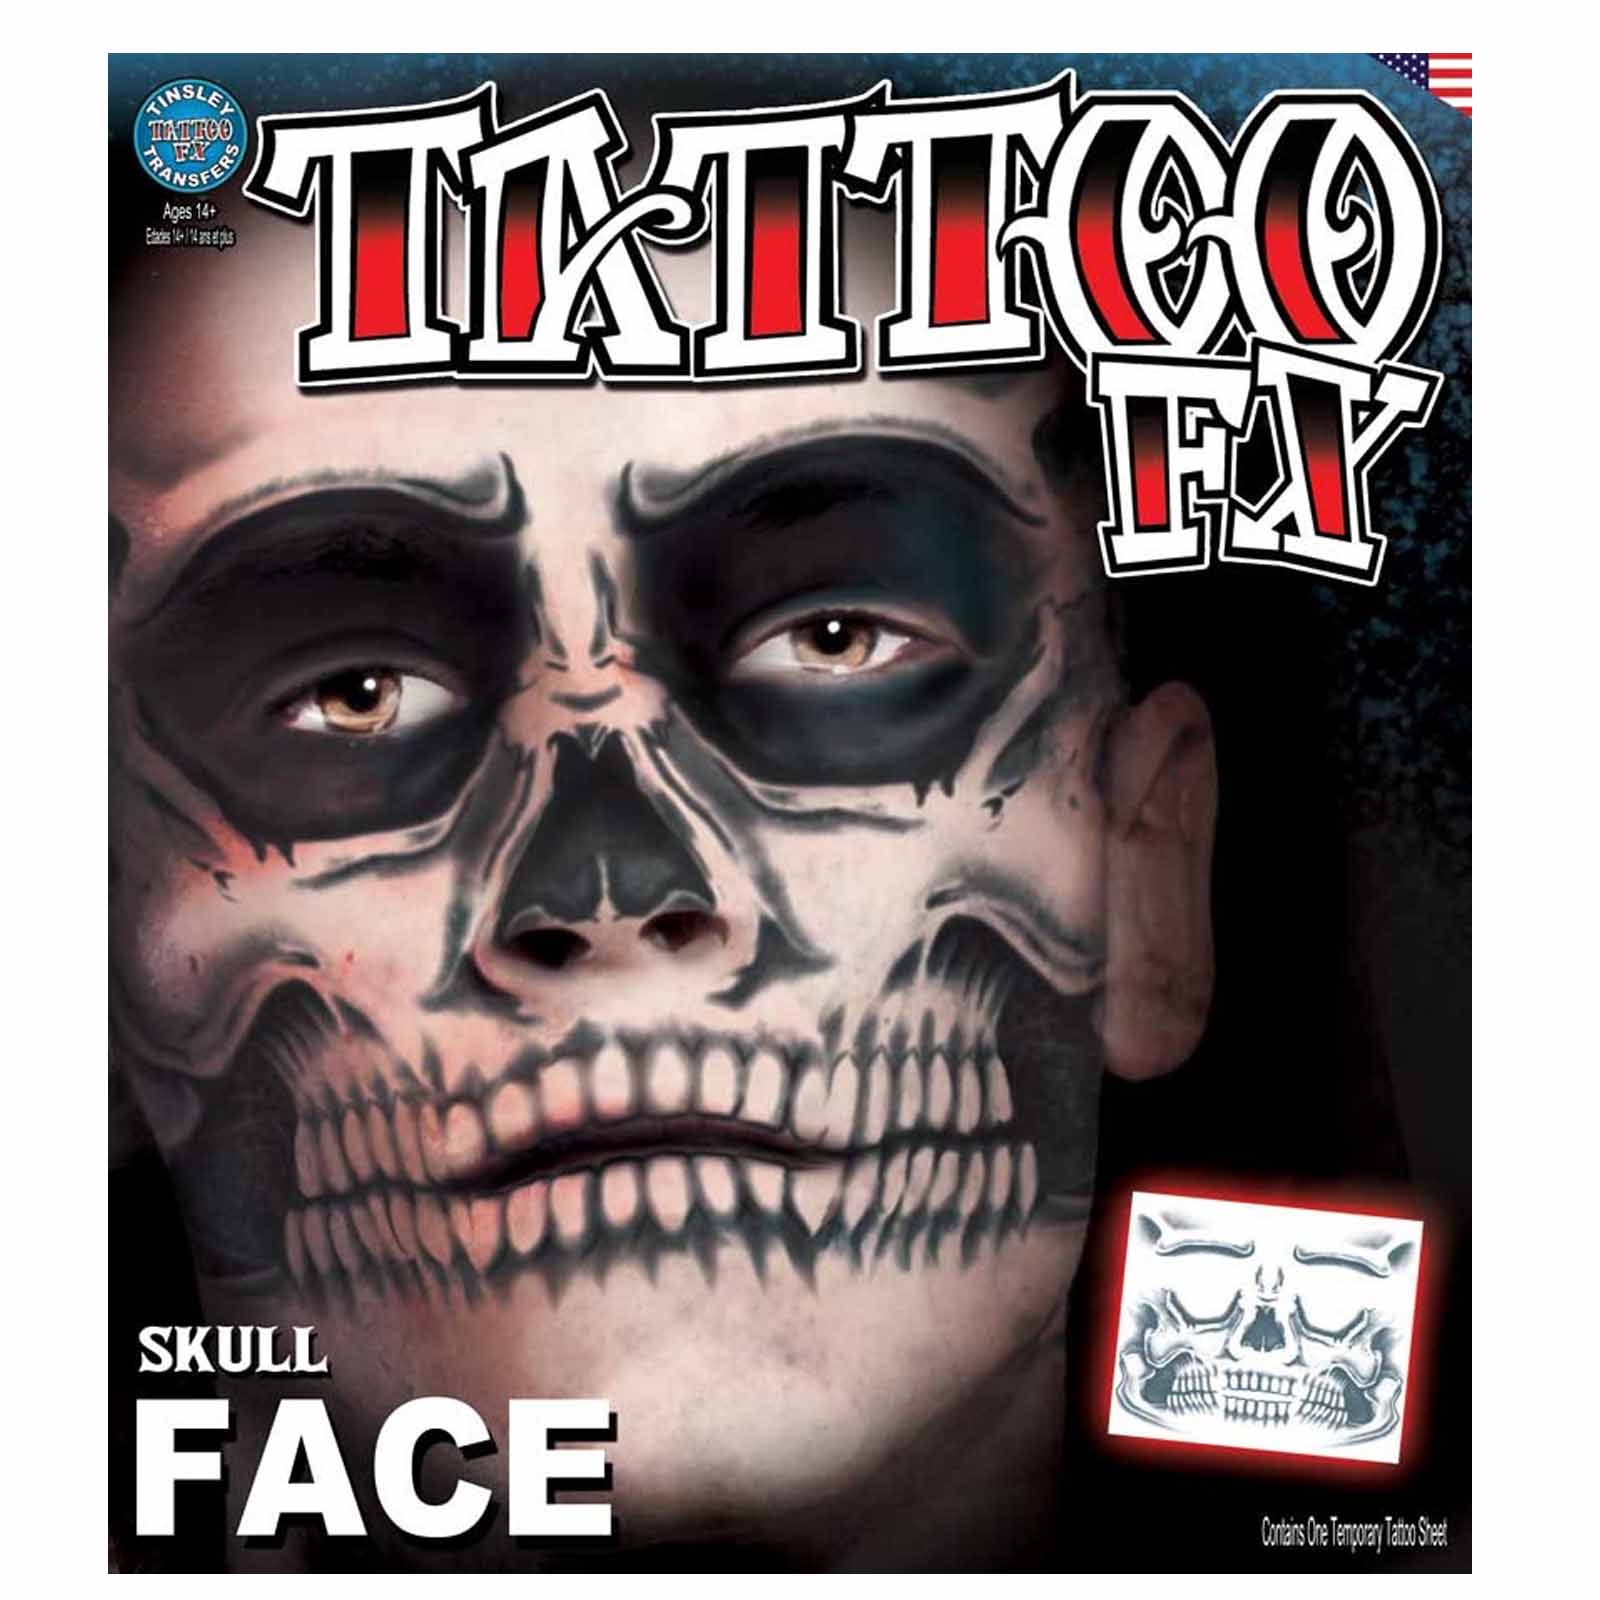 20 Sheets Day of the Dead Face Sugar Skull TattoosIncluding 8 Large Sheets  Halloween Temporary Face Tattoos Halloween Sugar Skull Face Tattoos B8  sheets in Kuwait  Whizz Temporary Tattoos